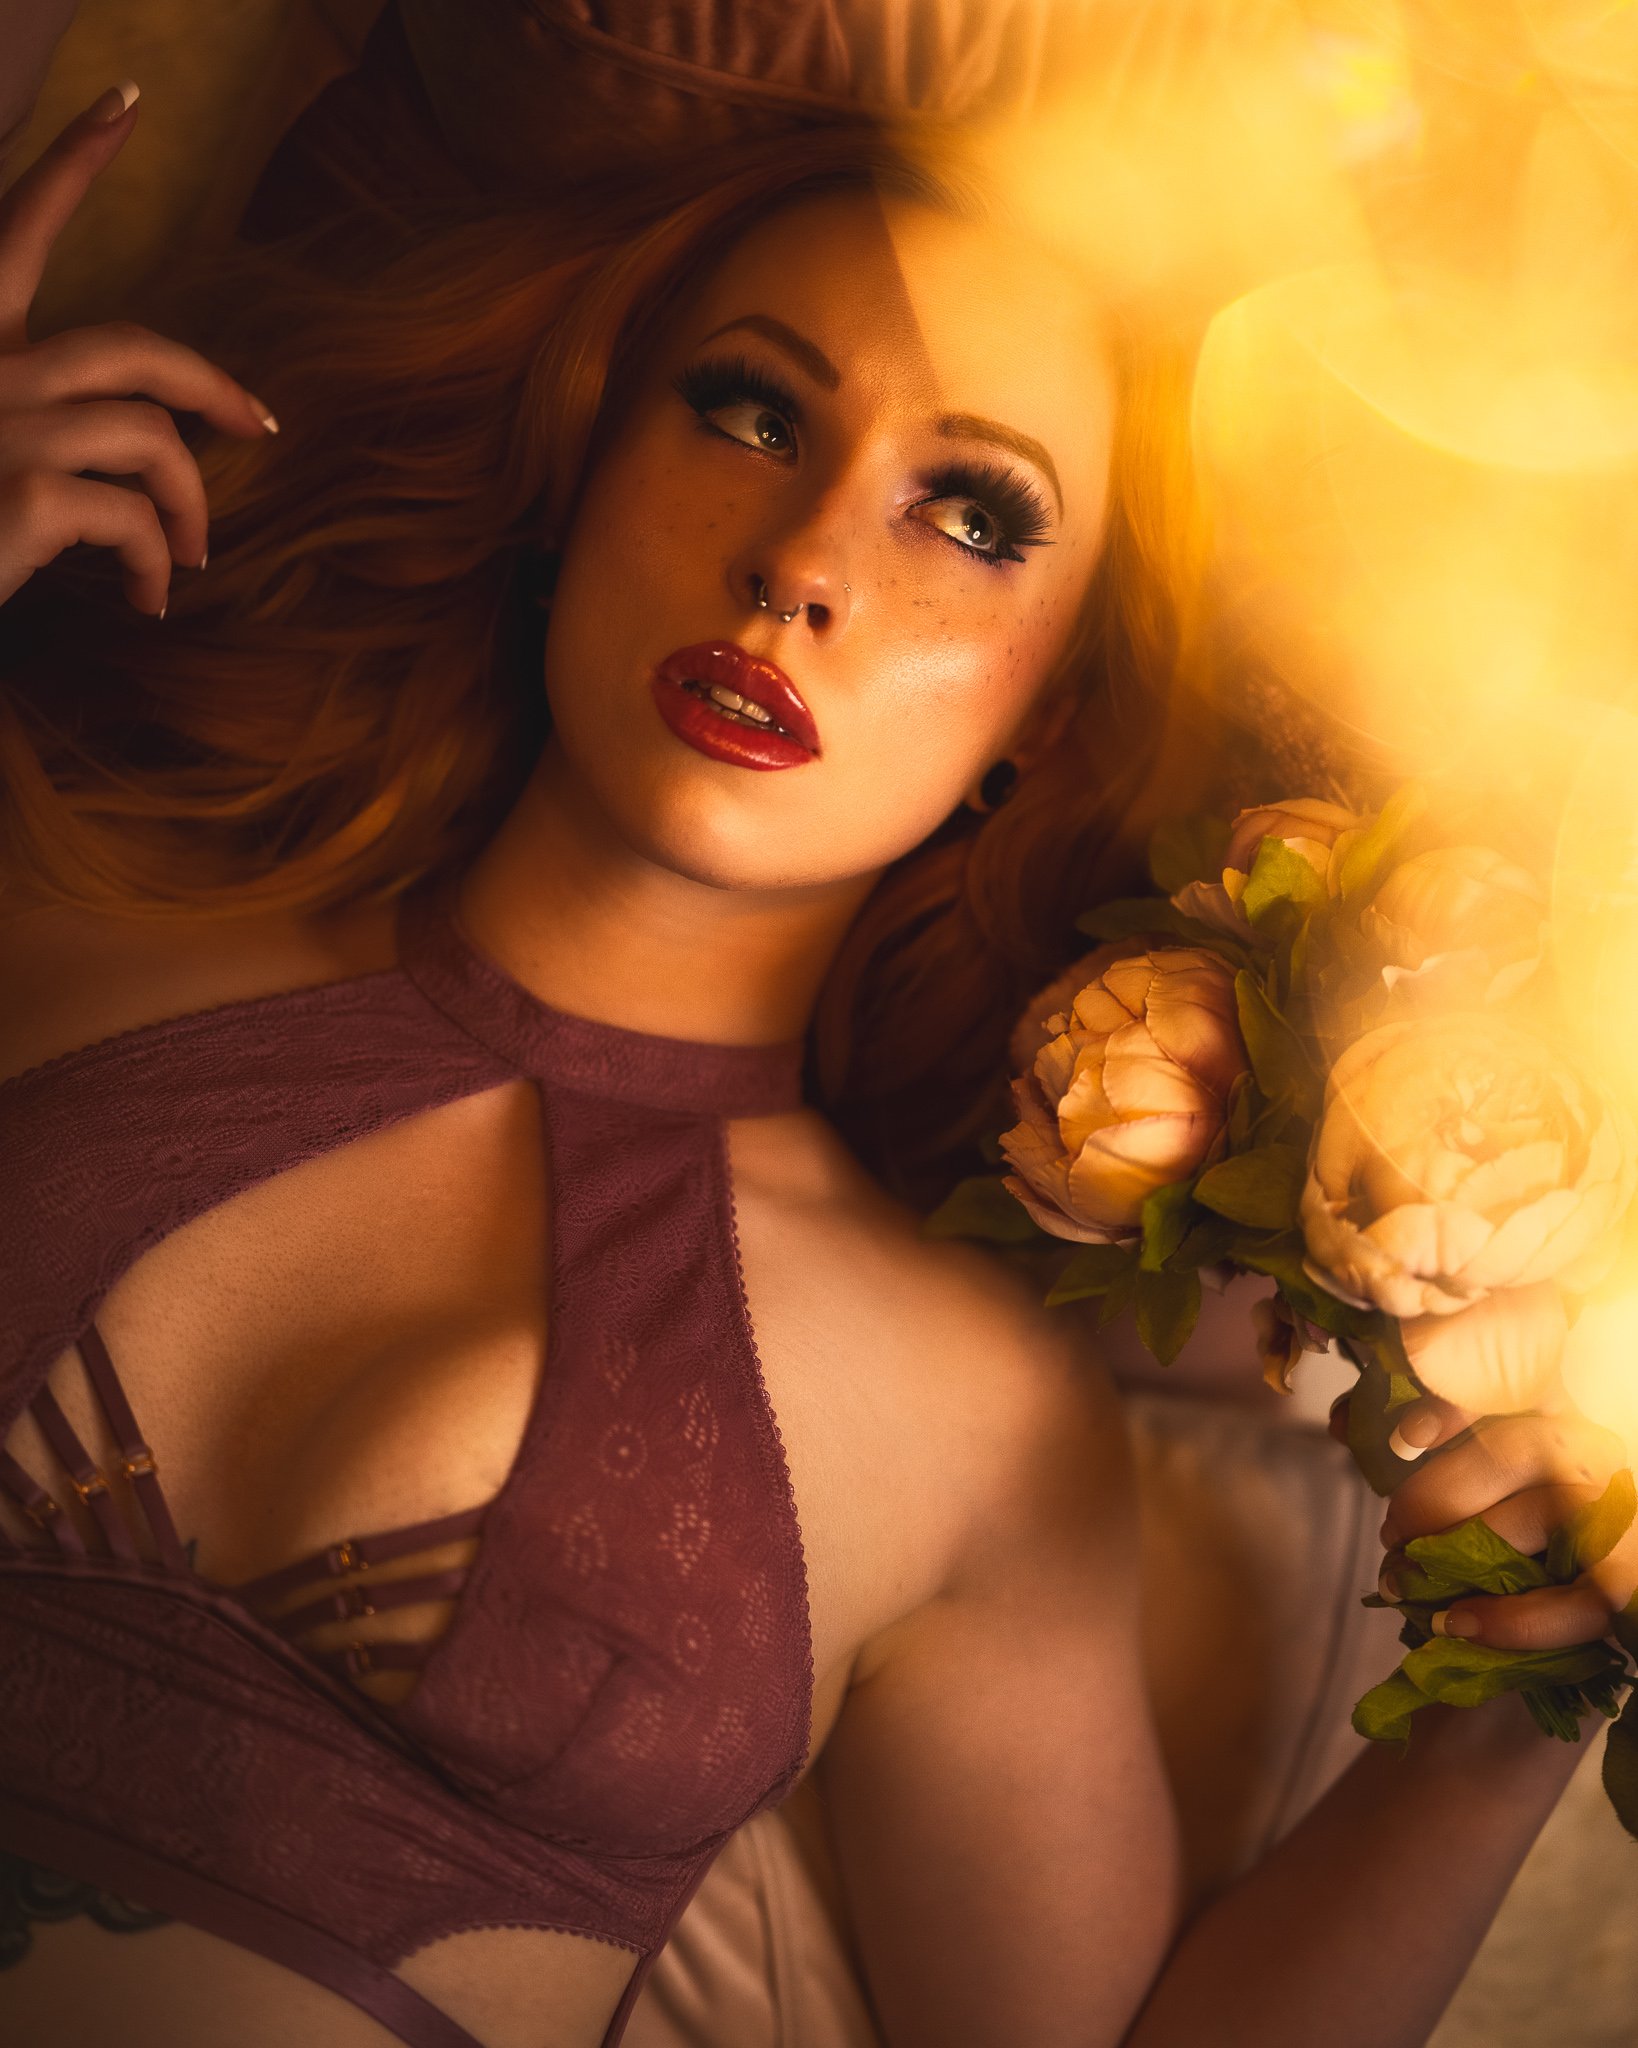 a sexy boudoir photo of redheaded model laying on a bed thinking with flowers by photographer yohance bailey based in binghamton new york  serving ithaca syracuse upstate new york.jpg